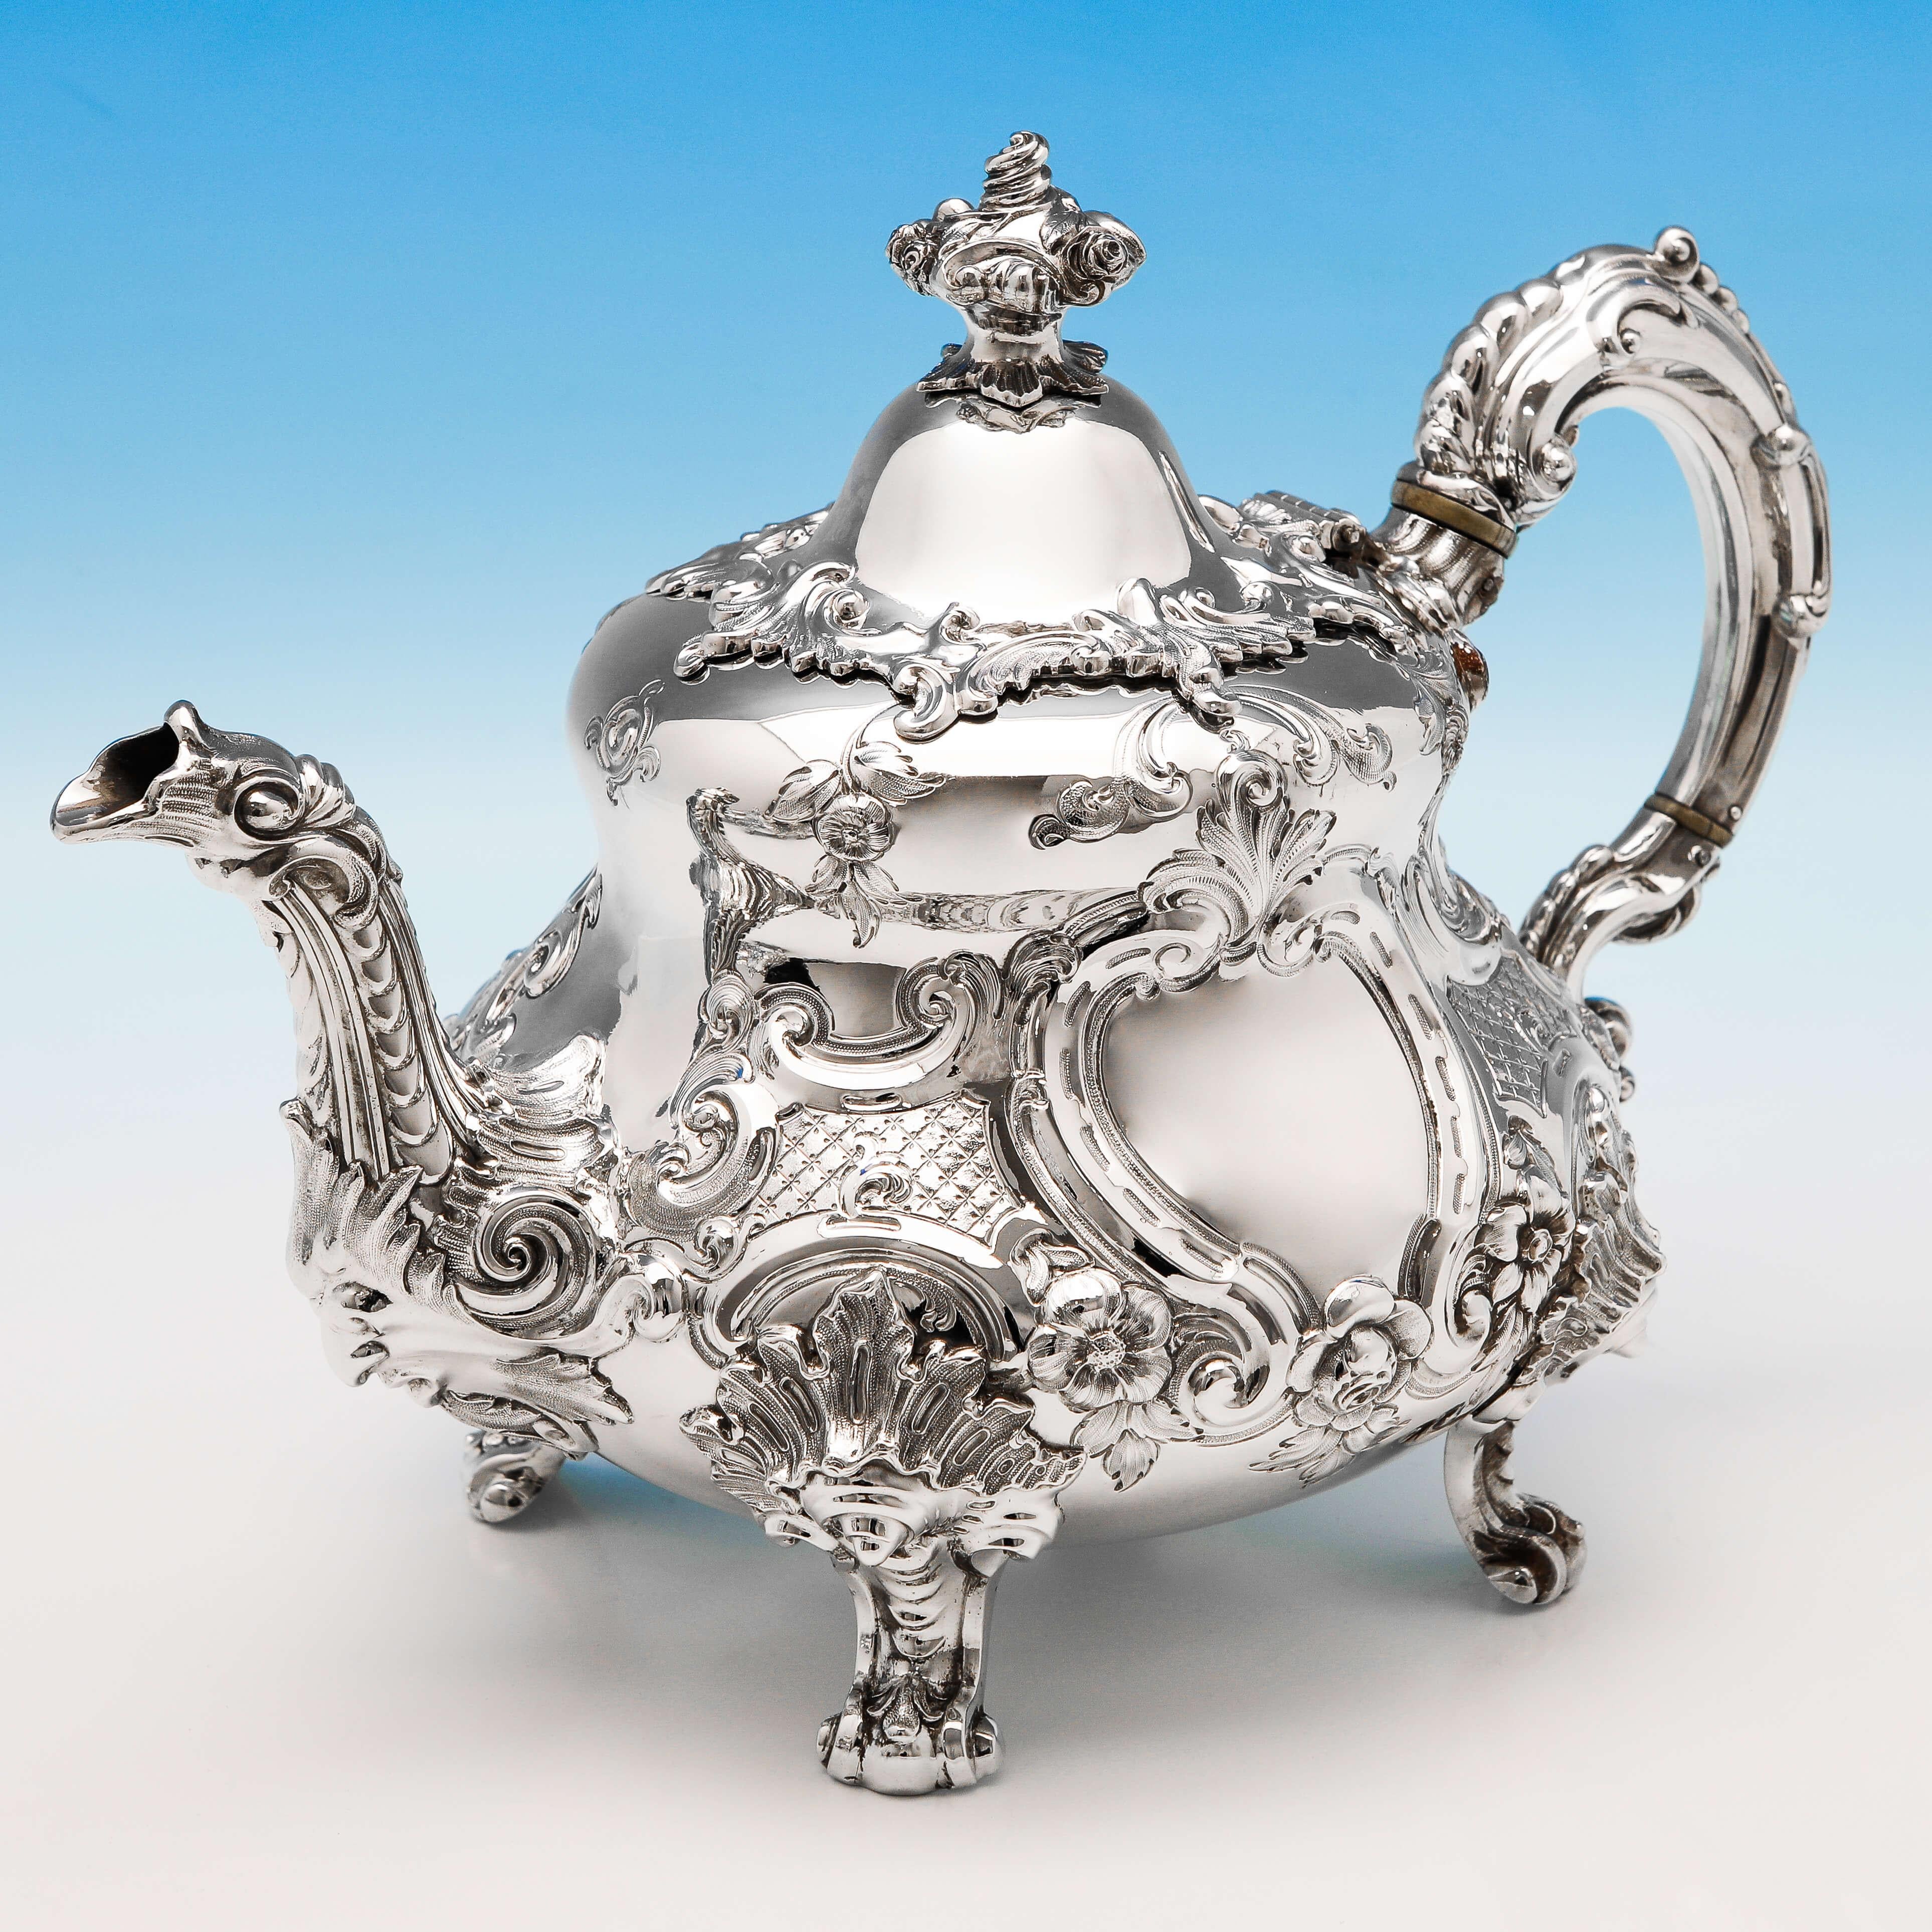 Hallmarked in London in 1855 by Barnards, this striking, Victorian, antique sterling silver tea set, is ornately chased throughout, and features silver handles and gilt interiors to the sugar and cream. The teapot measures 8.5